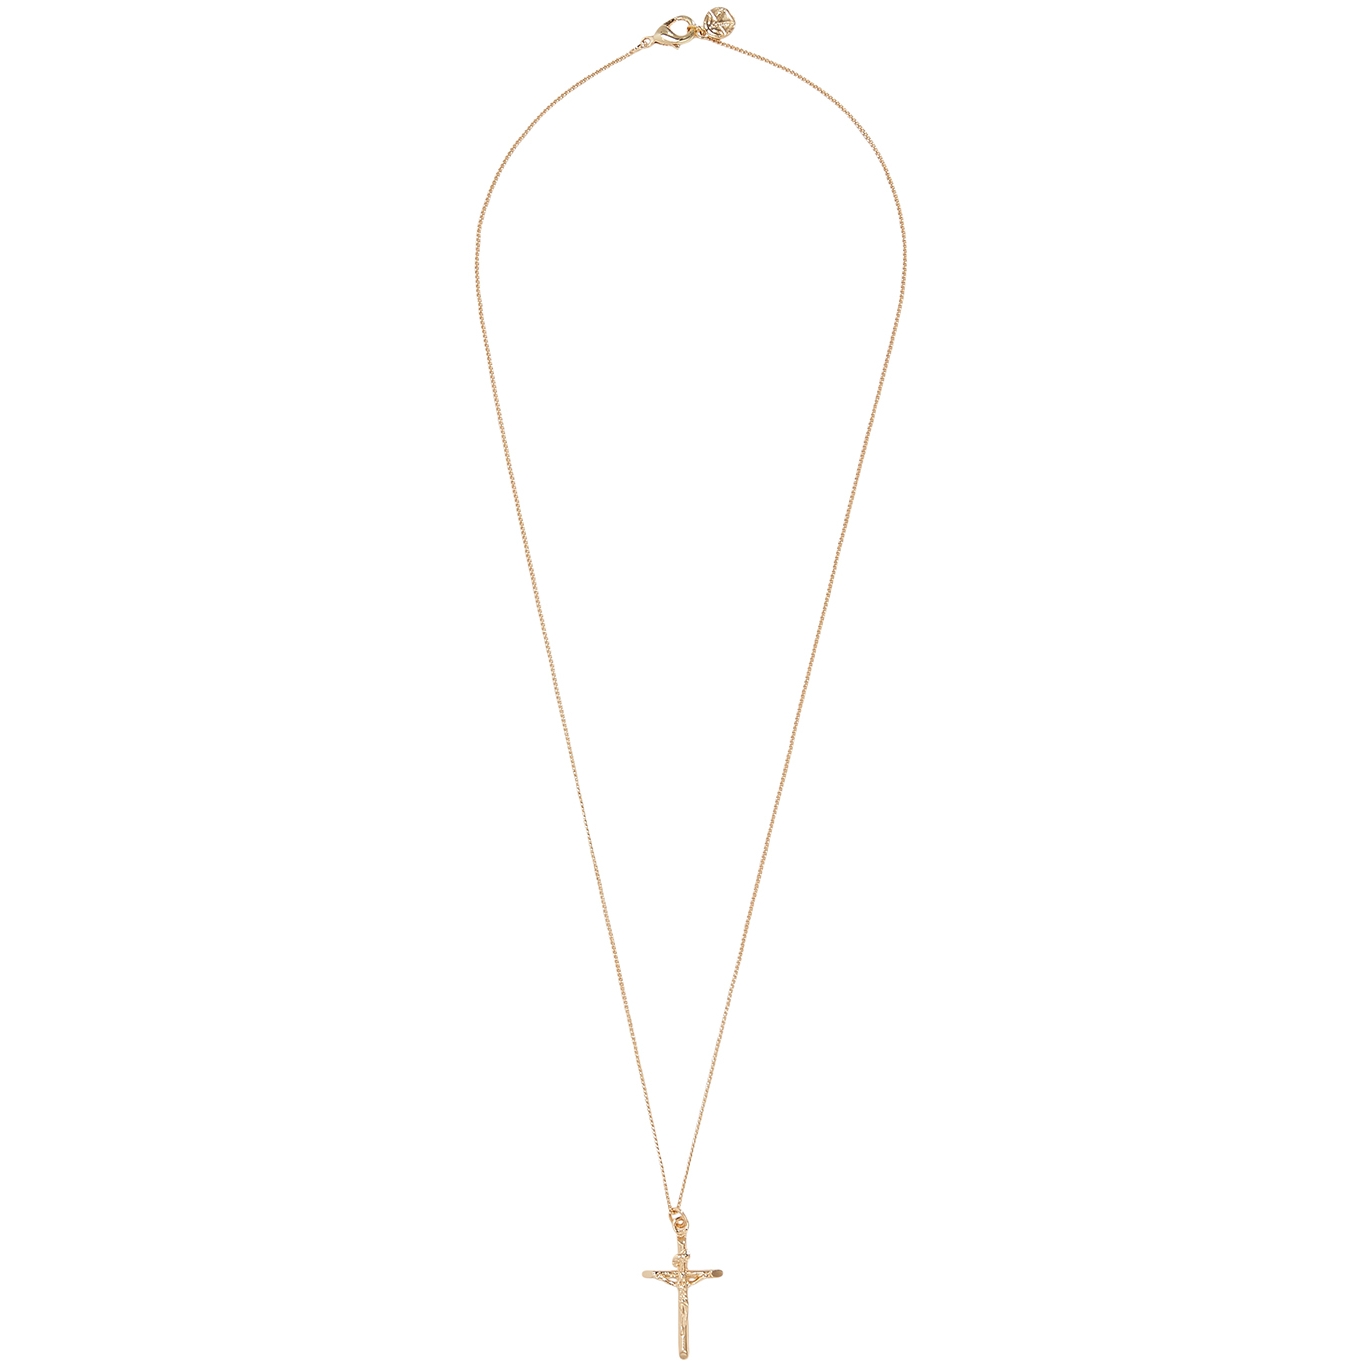 Chained & Able Mini Crucifix Gold-tone Chain Necklace